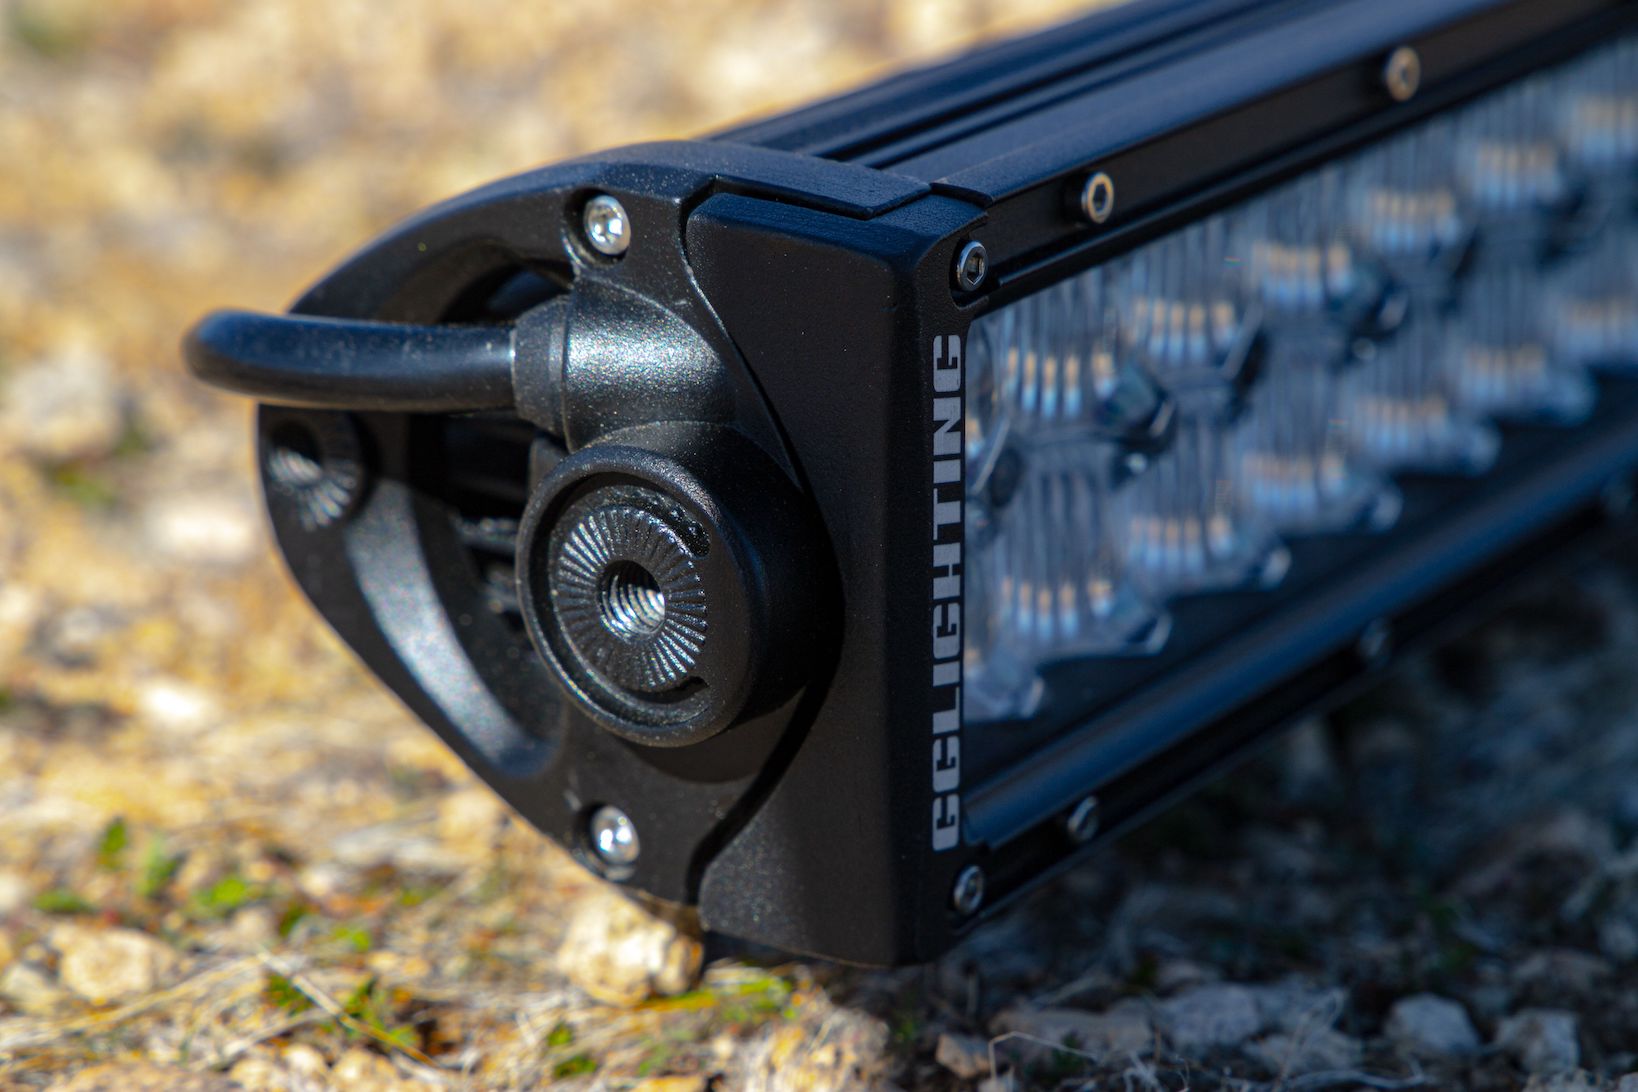 50 Curved Off-Road LED Light Bar - Double Row - 288W - 23,040 Lumens -  Spot Beam